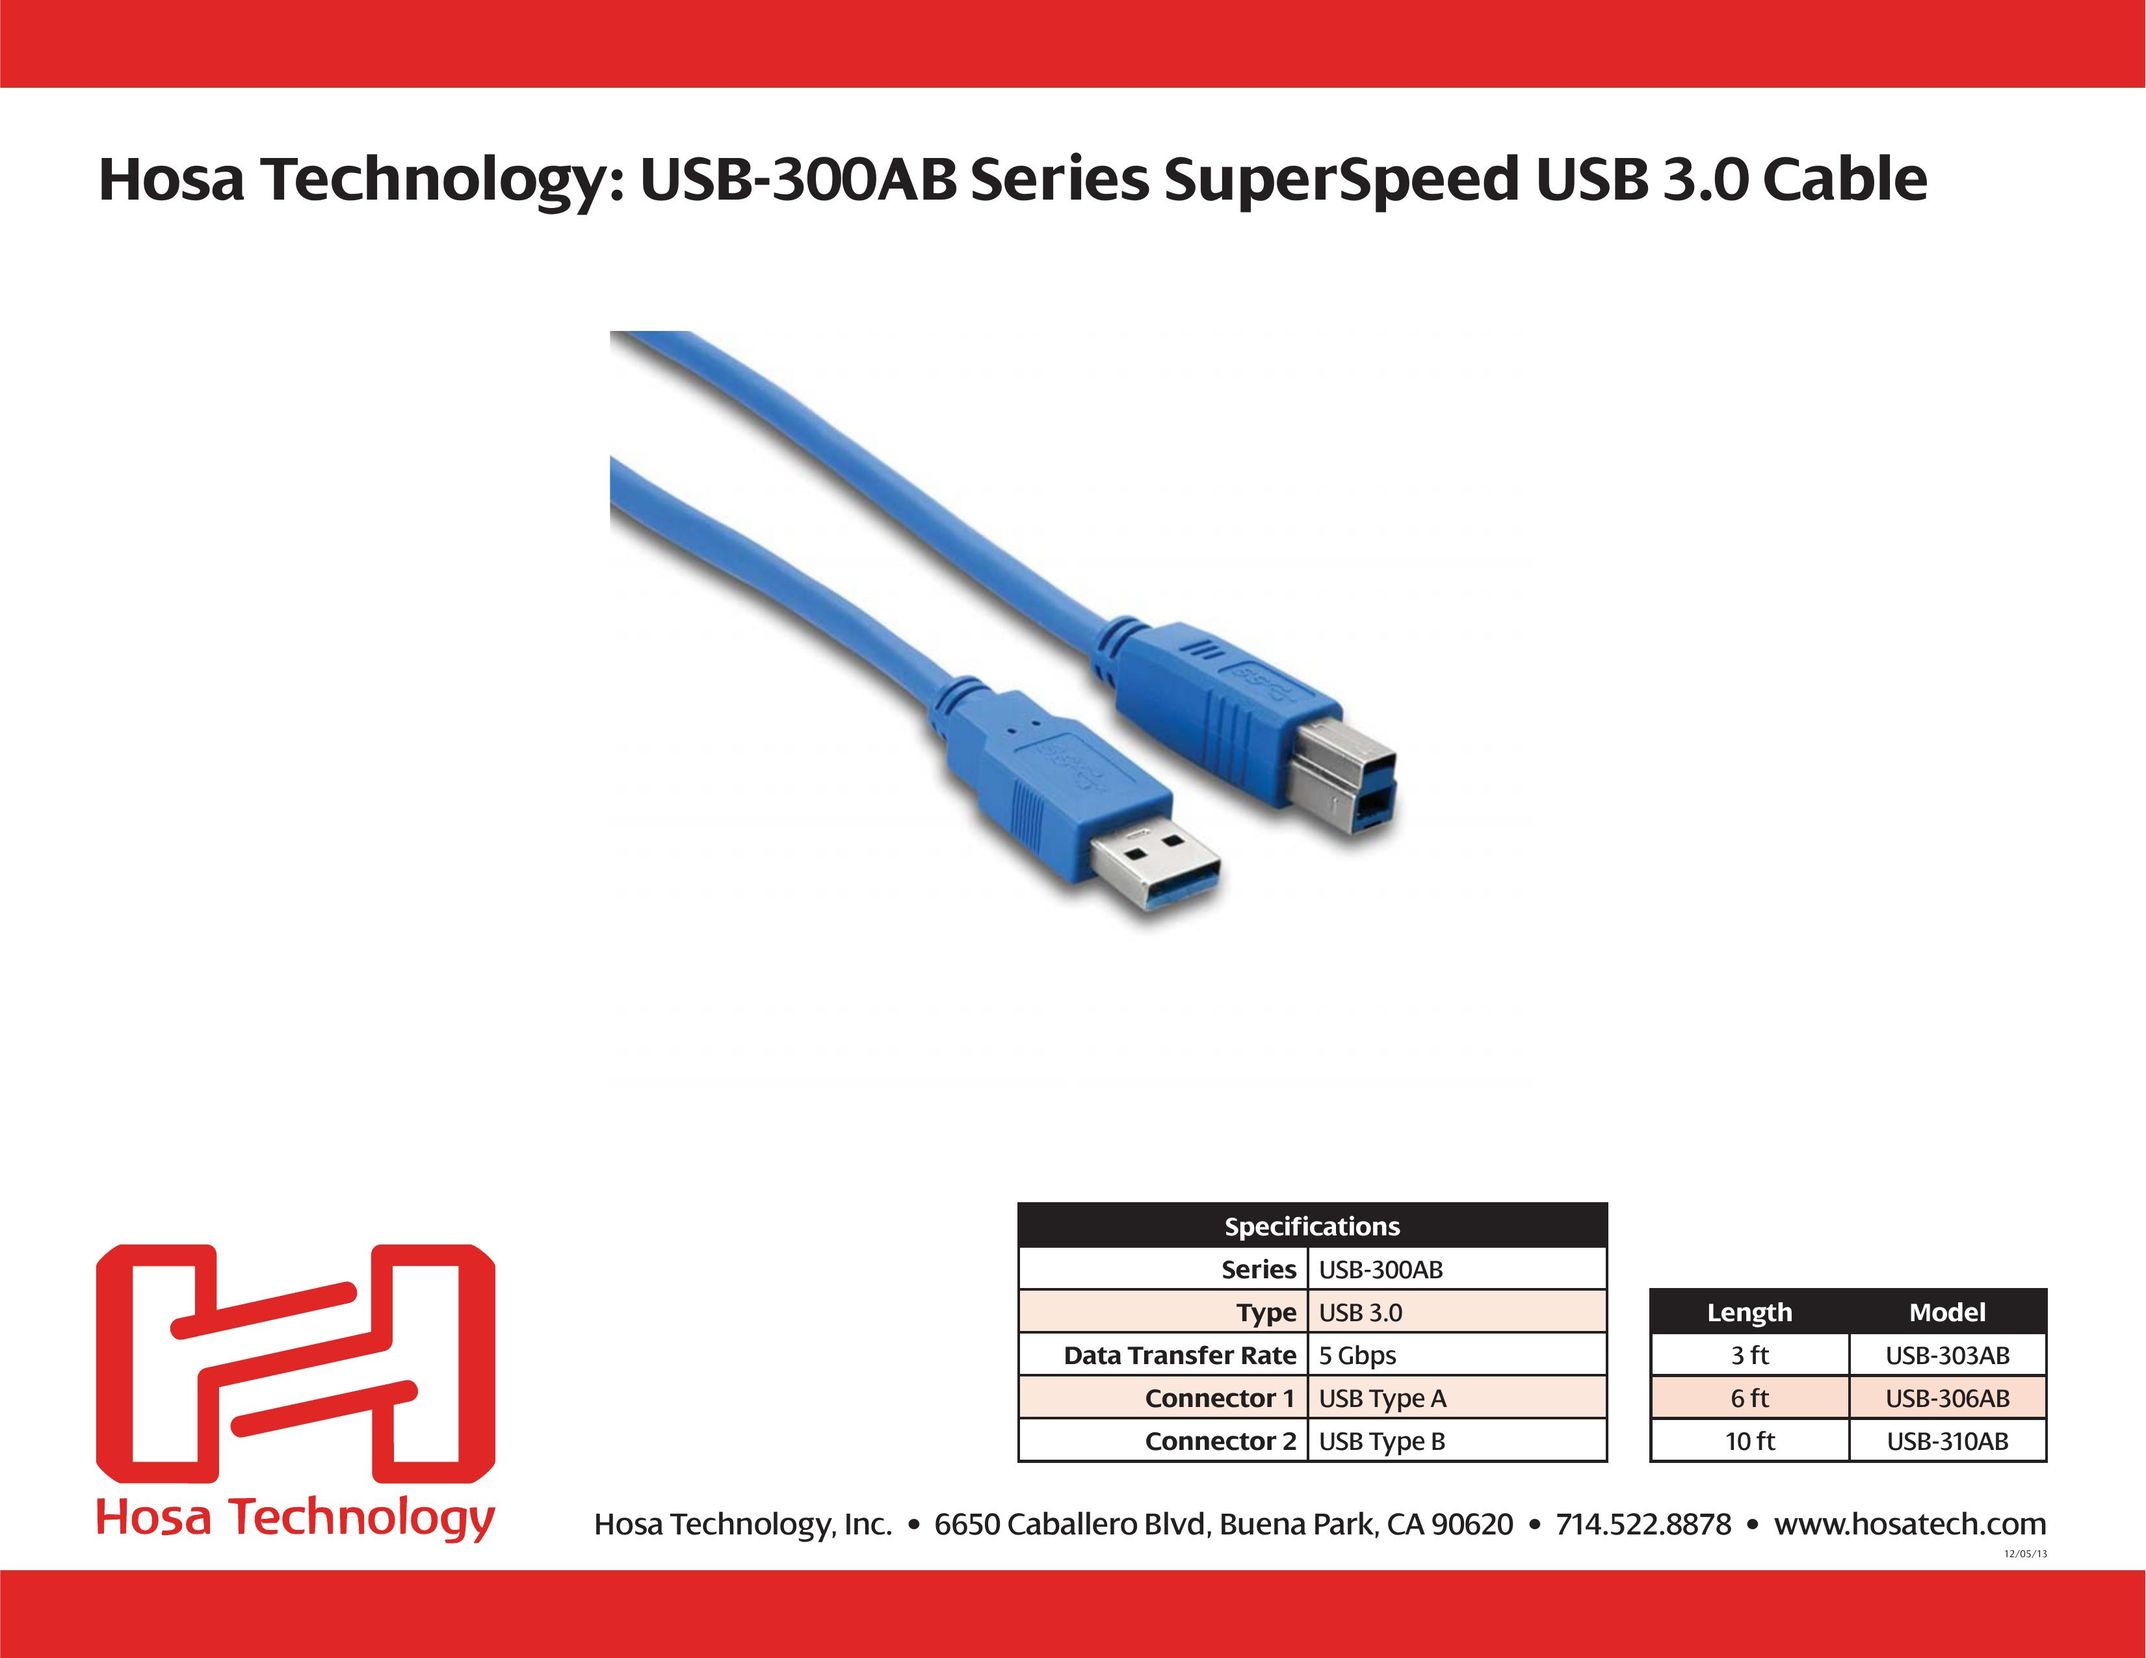 Hosa Technology 3 ft USB-303AB Network Cables User Manual